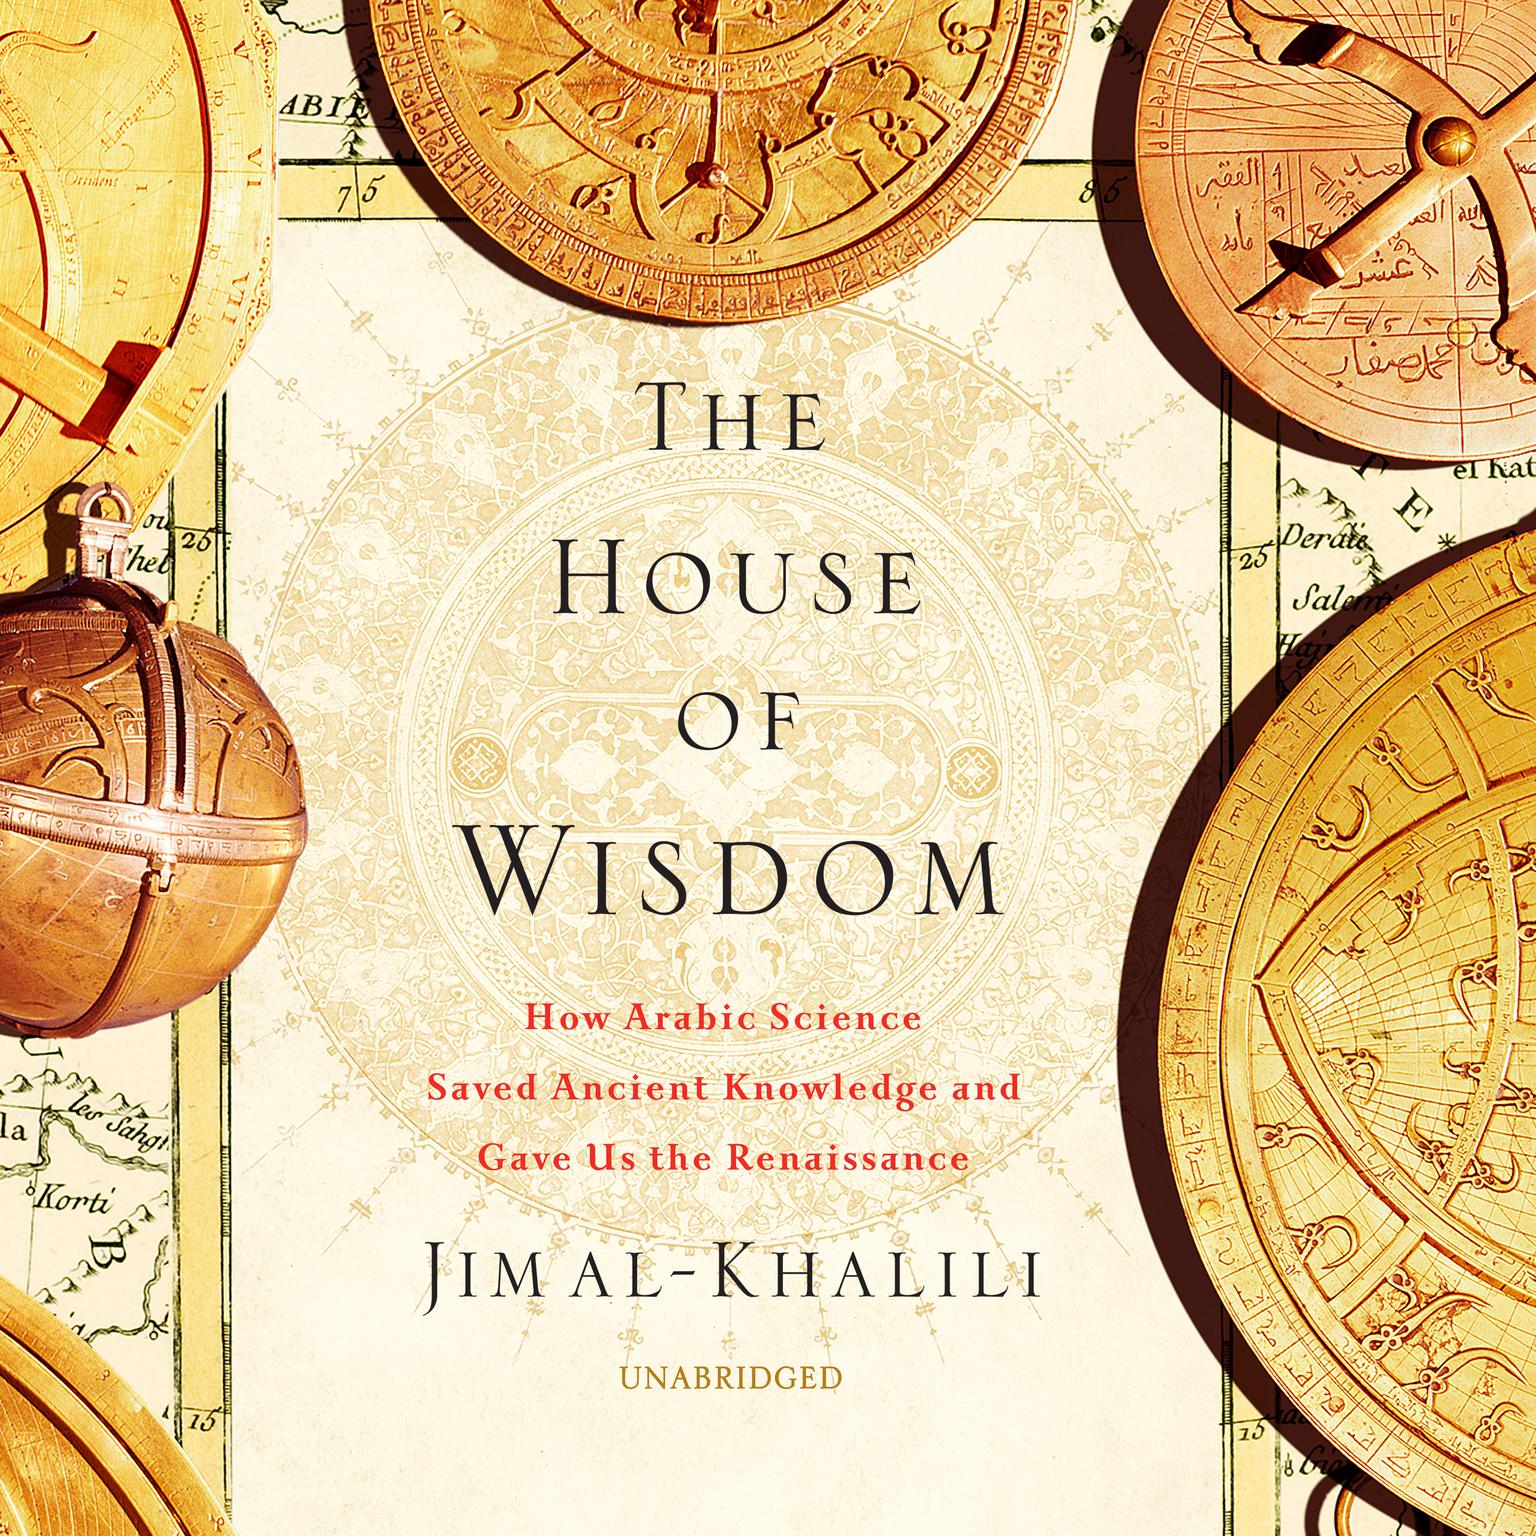 The House of Wisdom: How Arabic Science Saved Ancient Knowledge and Gave Us the Renaissance Audiobook, by Jim al-Khalili